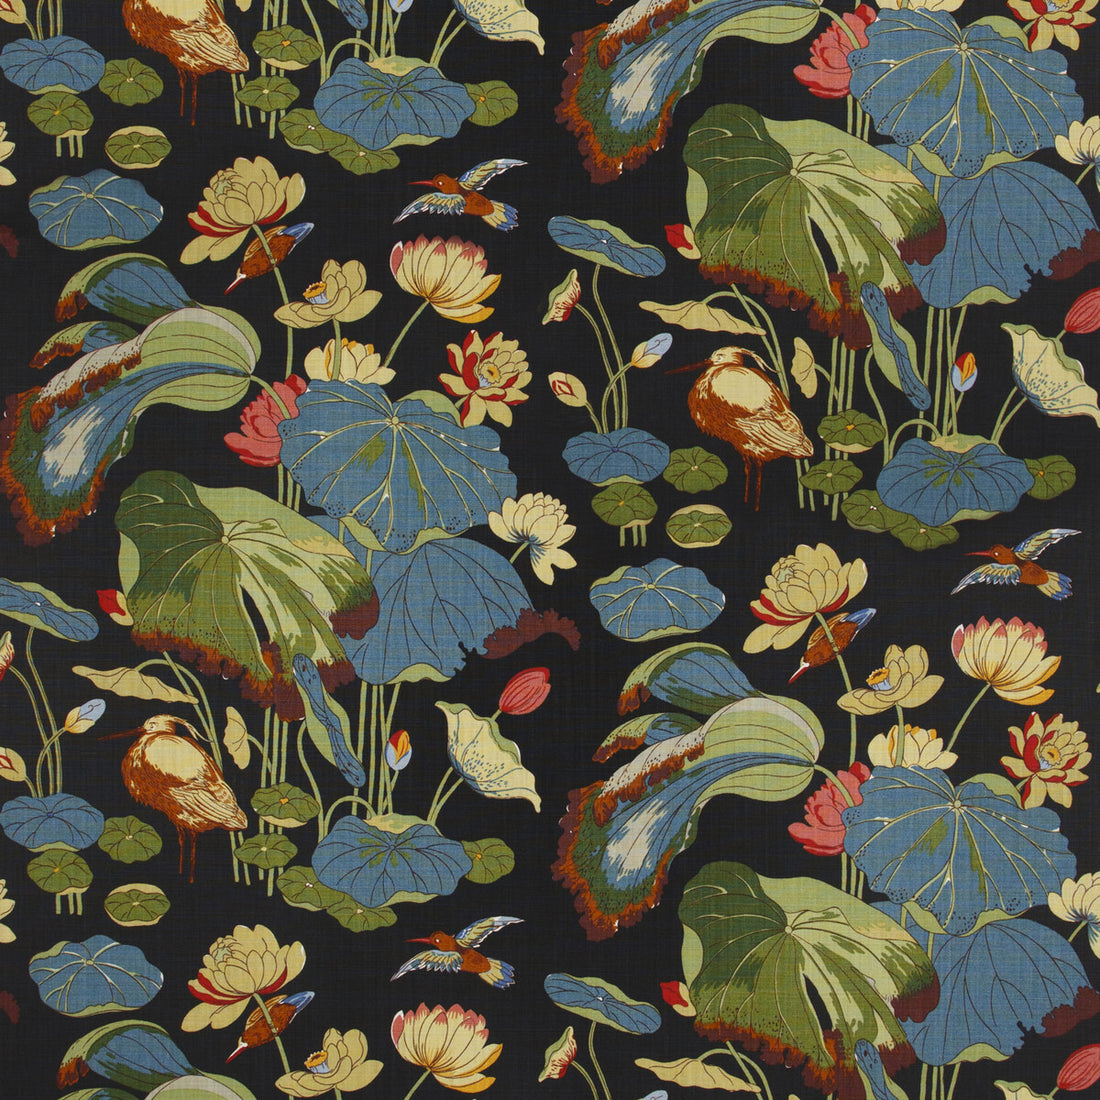 Nympheus Print fabric in teal color - pattern 2002172.8.0 - by Lee Jofa in the Perennia collection